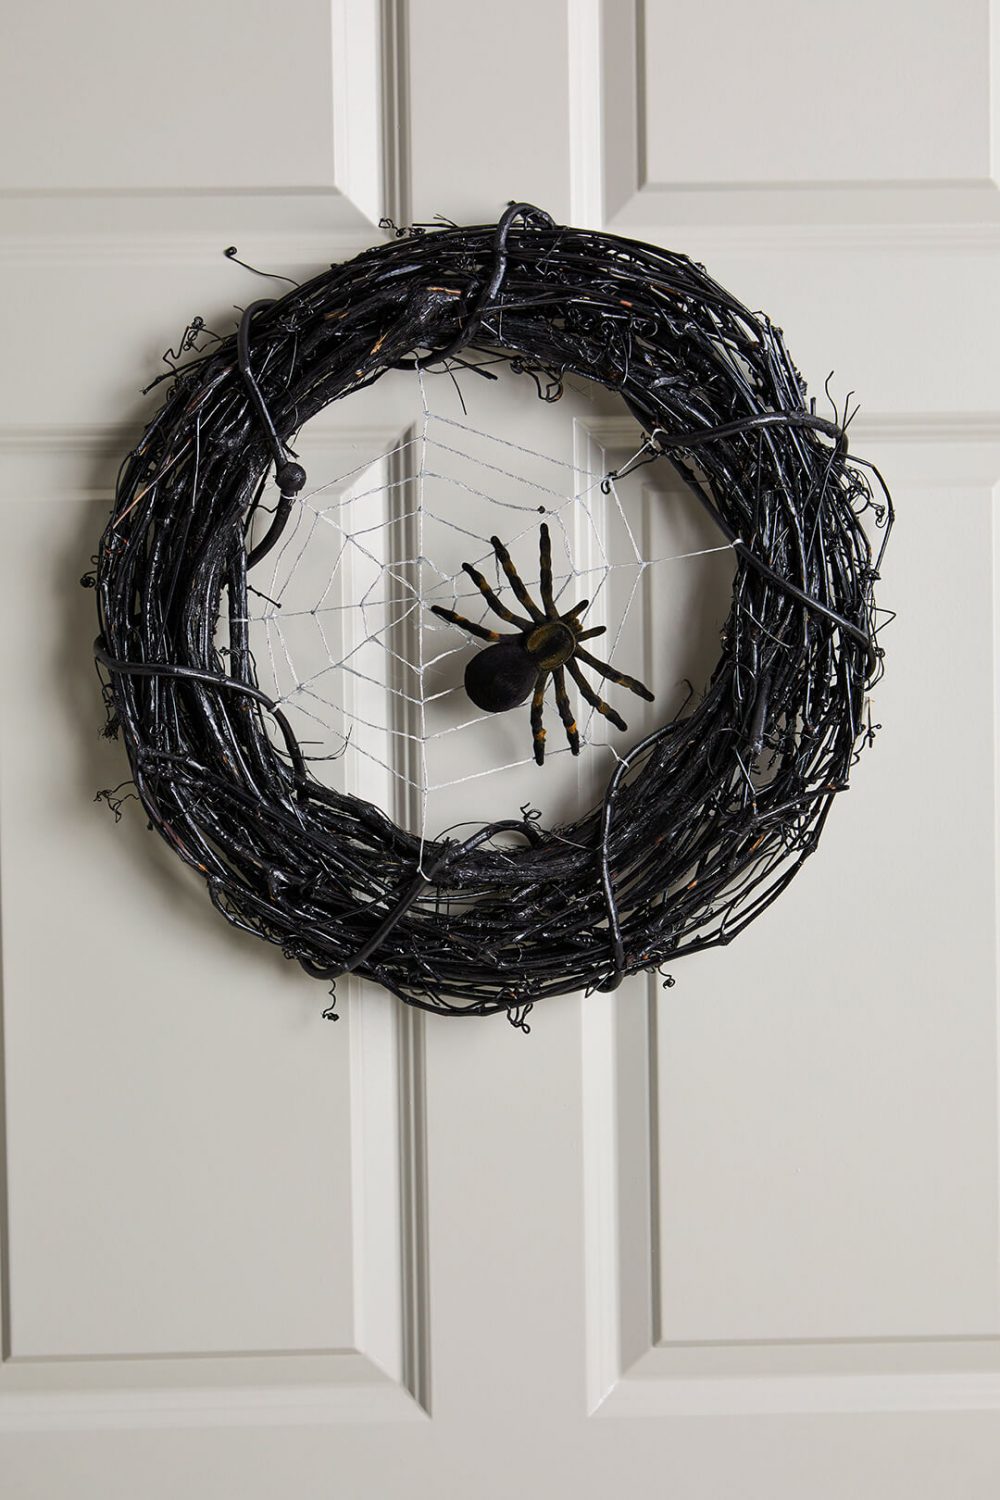 A wreath with a spider on it hanging on a door
